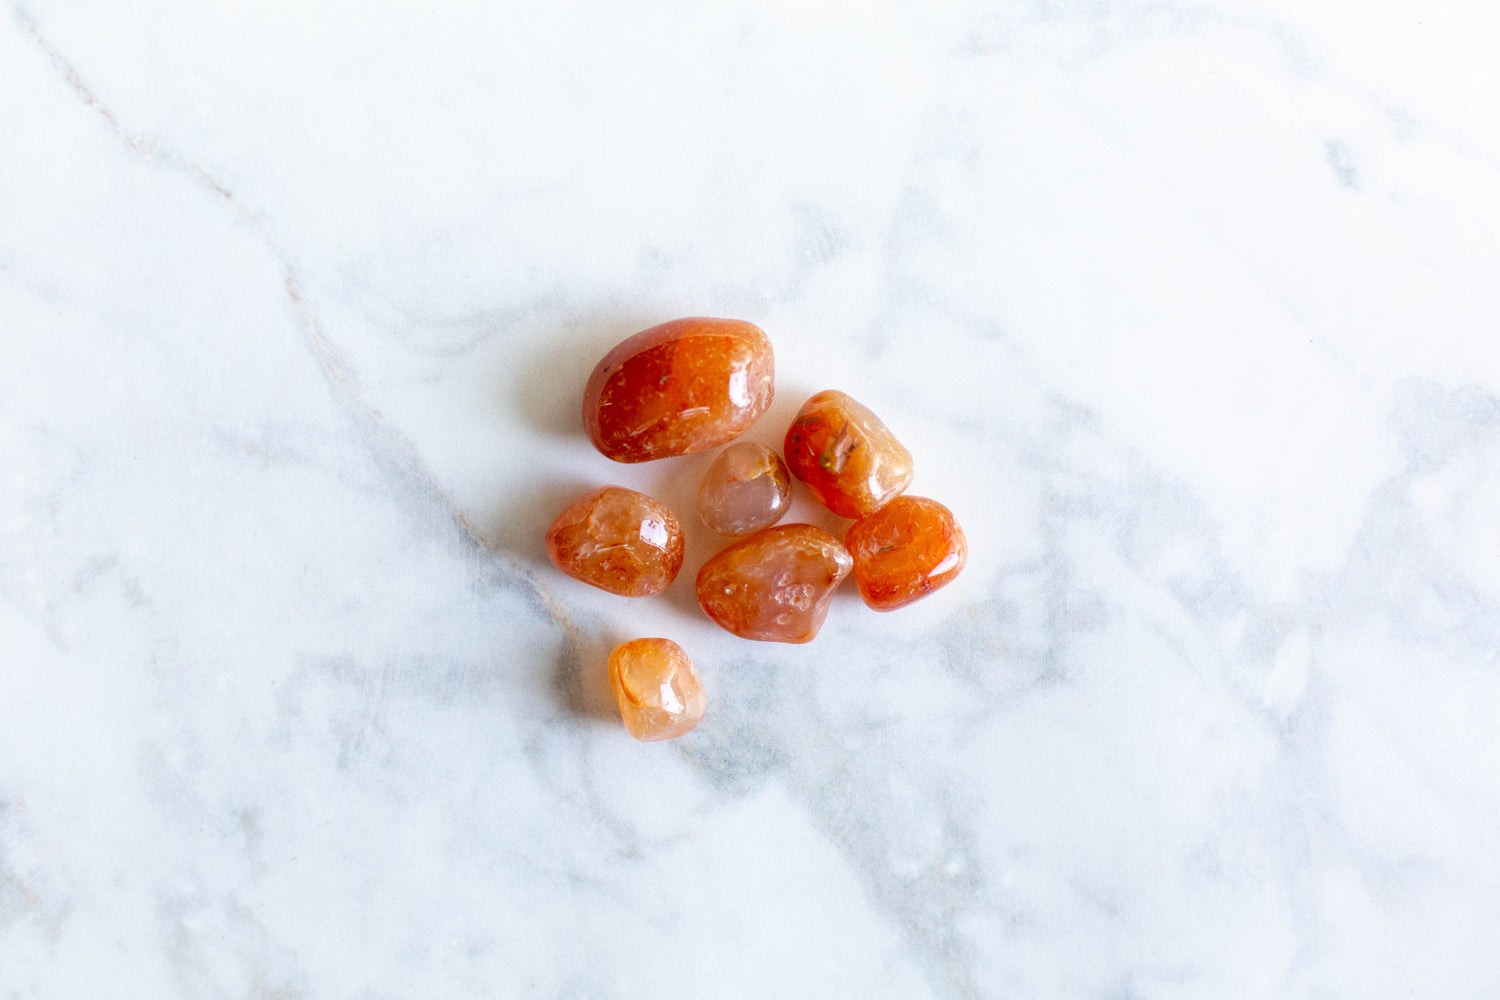 7 small carnelian tumbled stones together on a white marble background